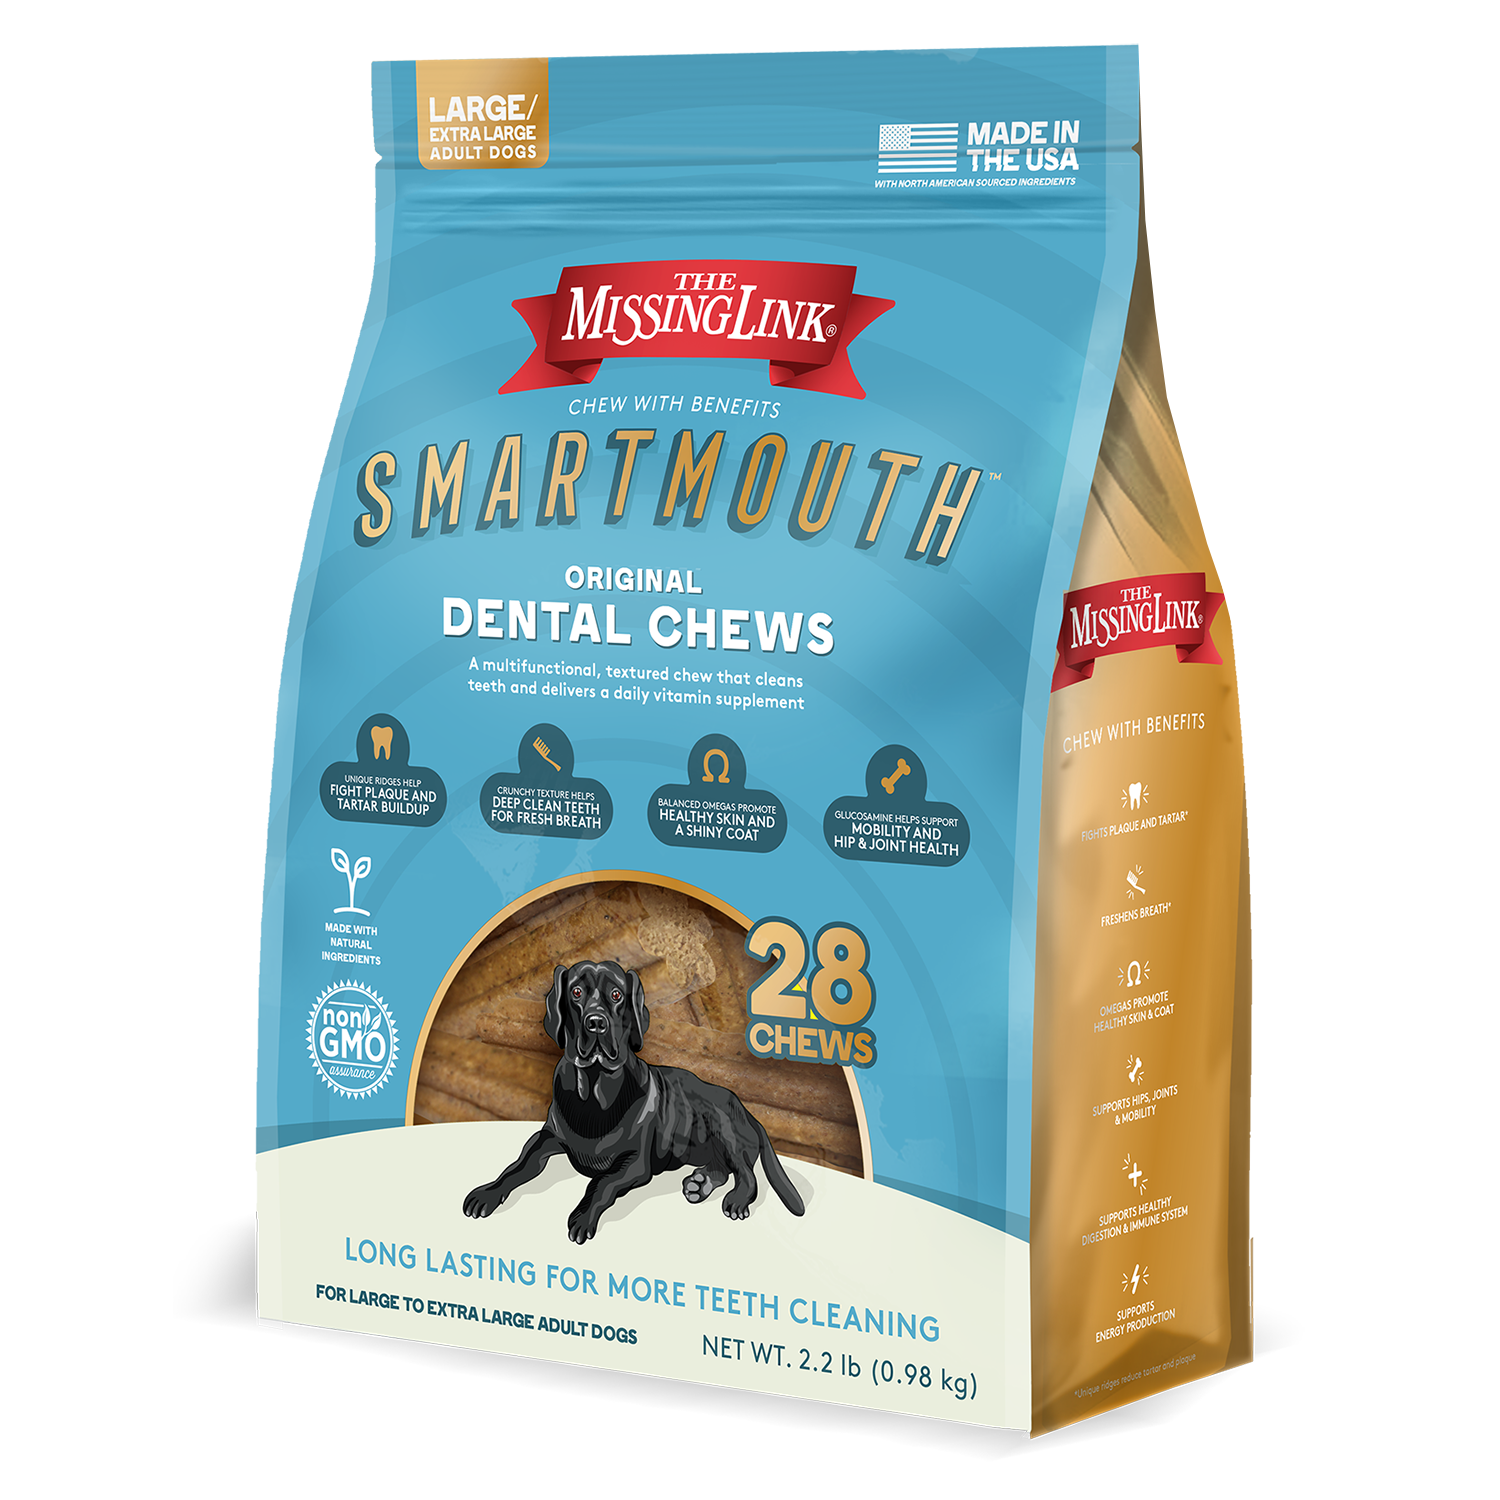 Missing Link Smartmouth Dental Chew LG/XLG Dog - 28ct